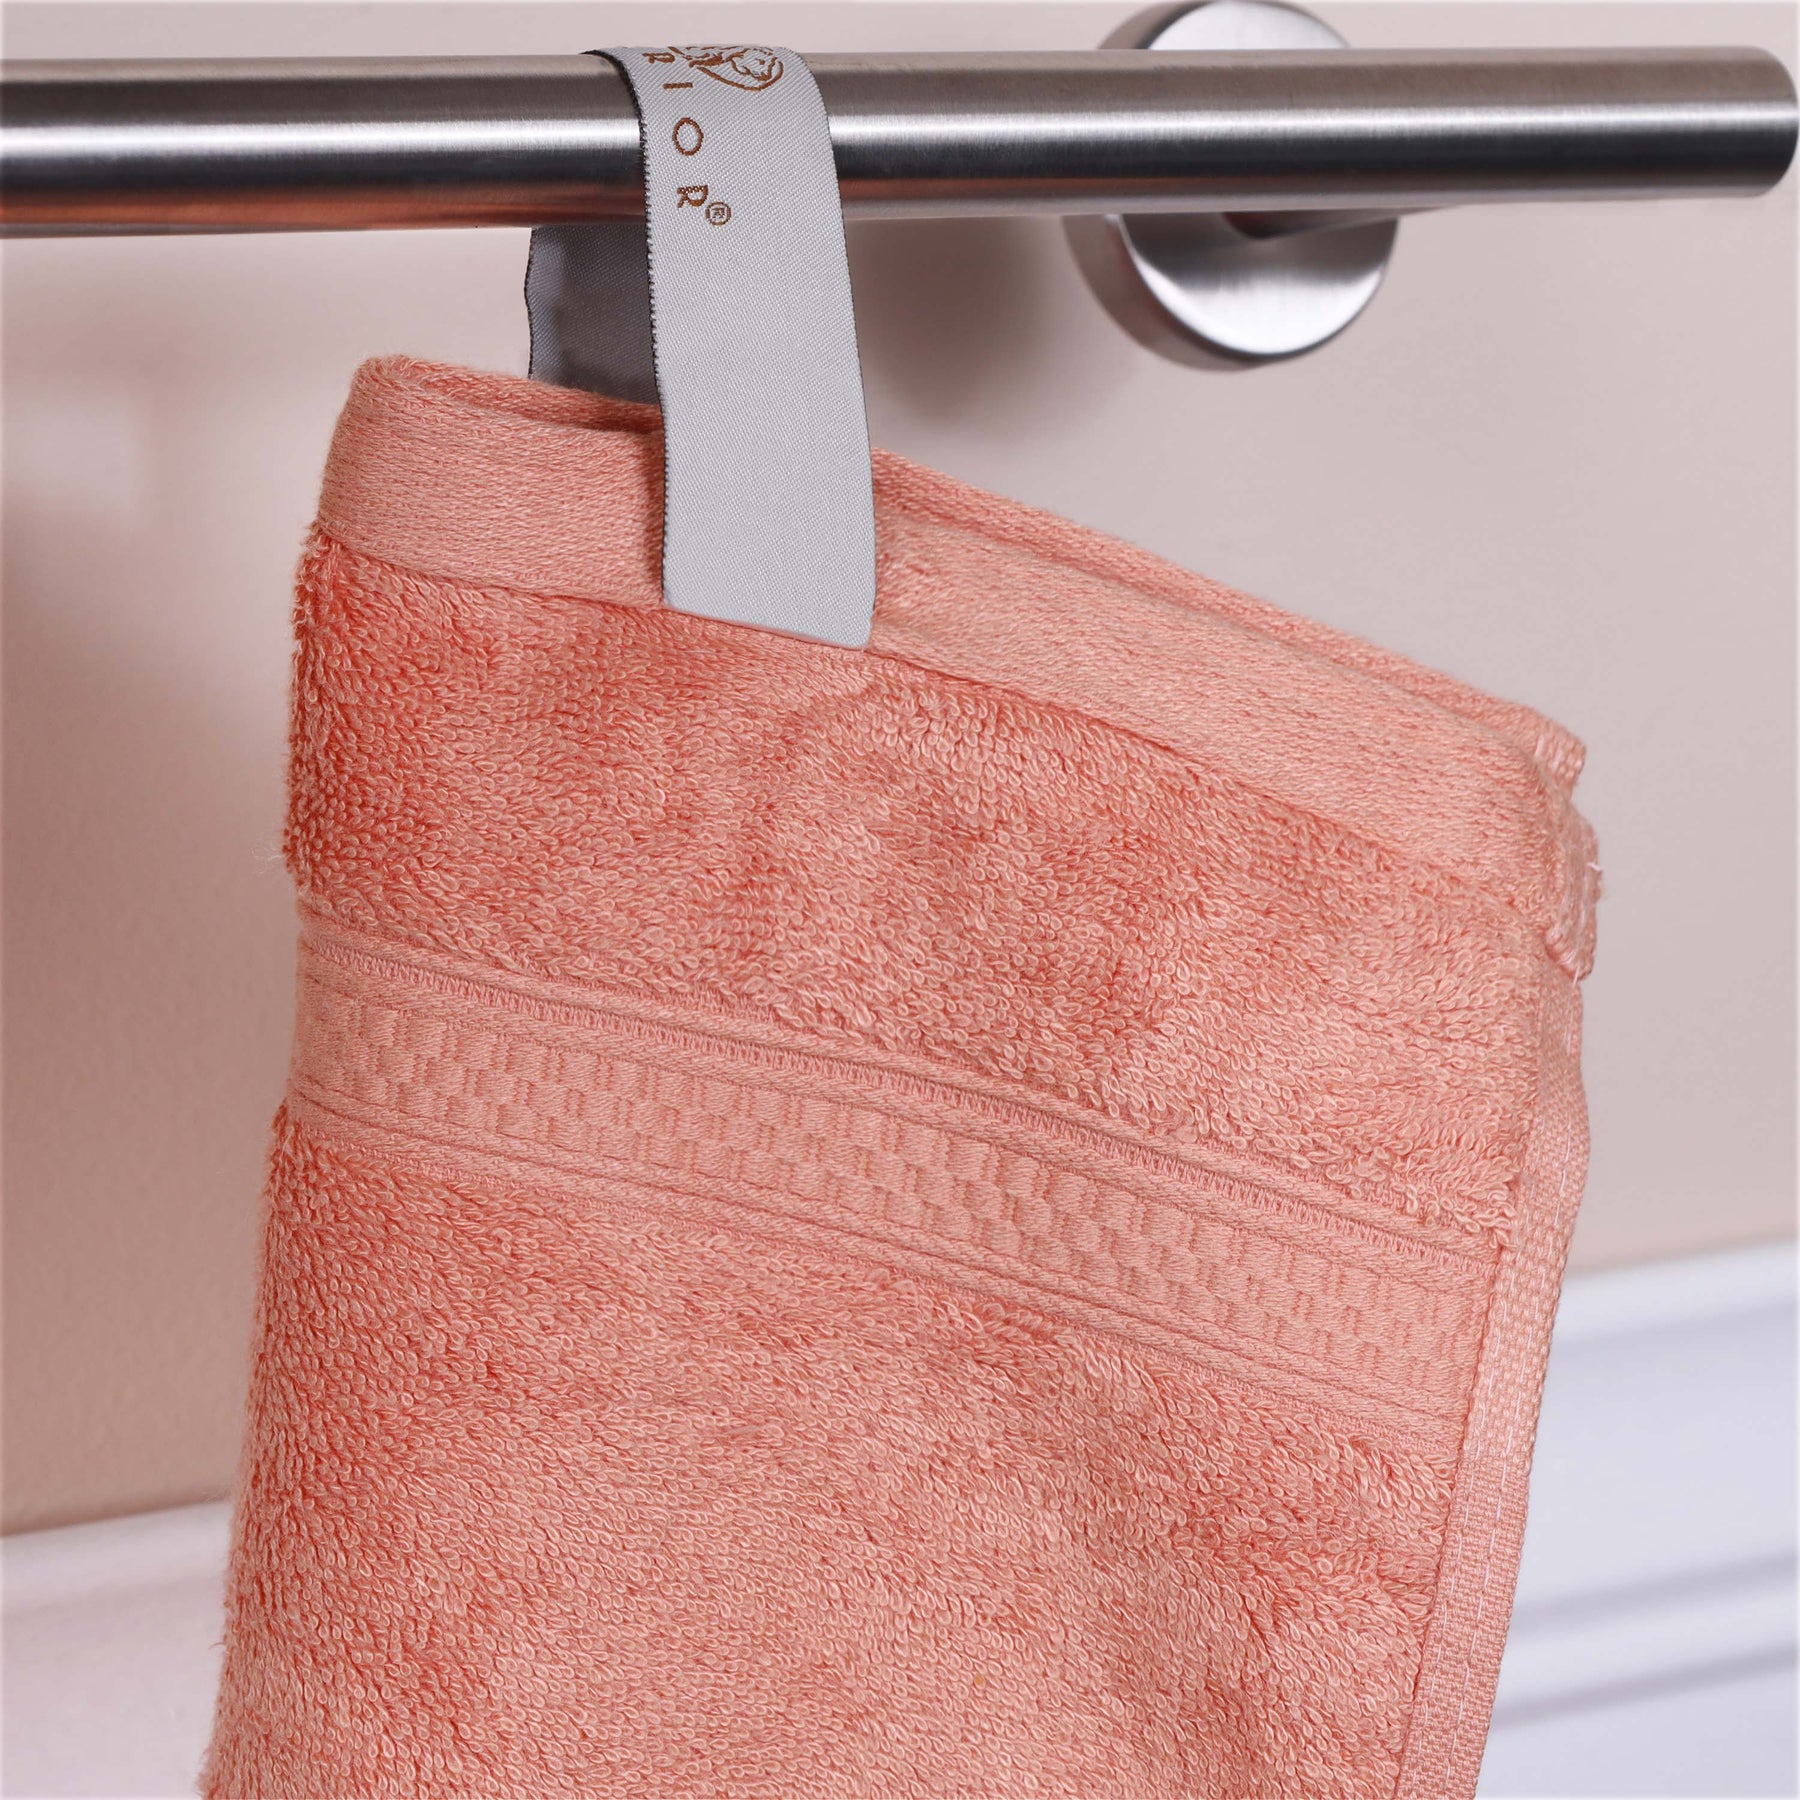 Rayon from Bamboo Cotton Blend Luxury Assorted 18 Piece Towel Set - Salmon